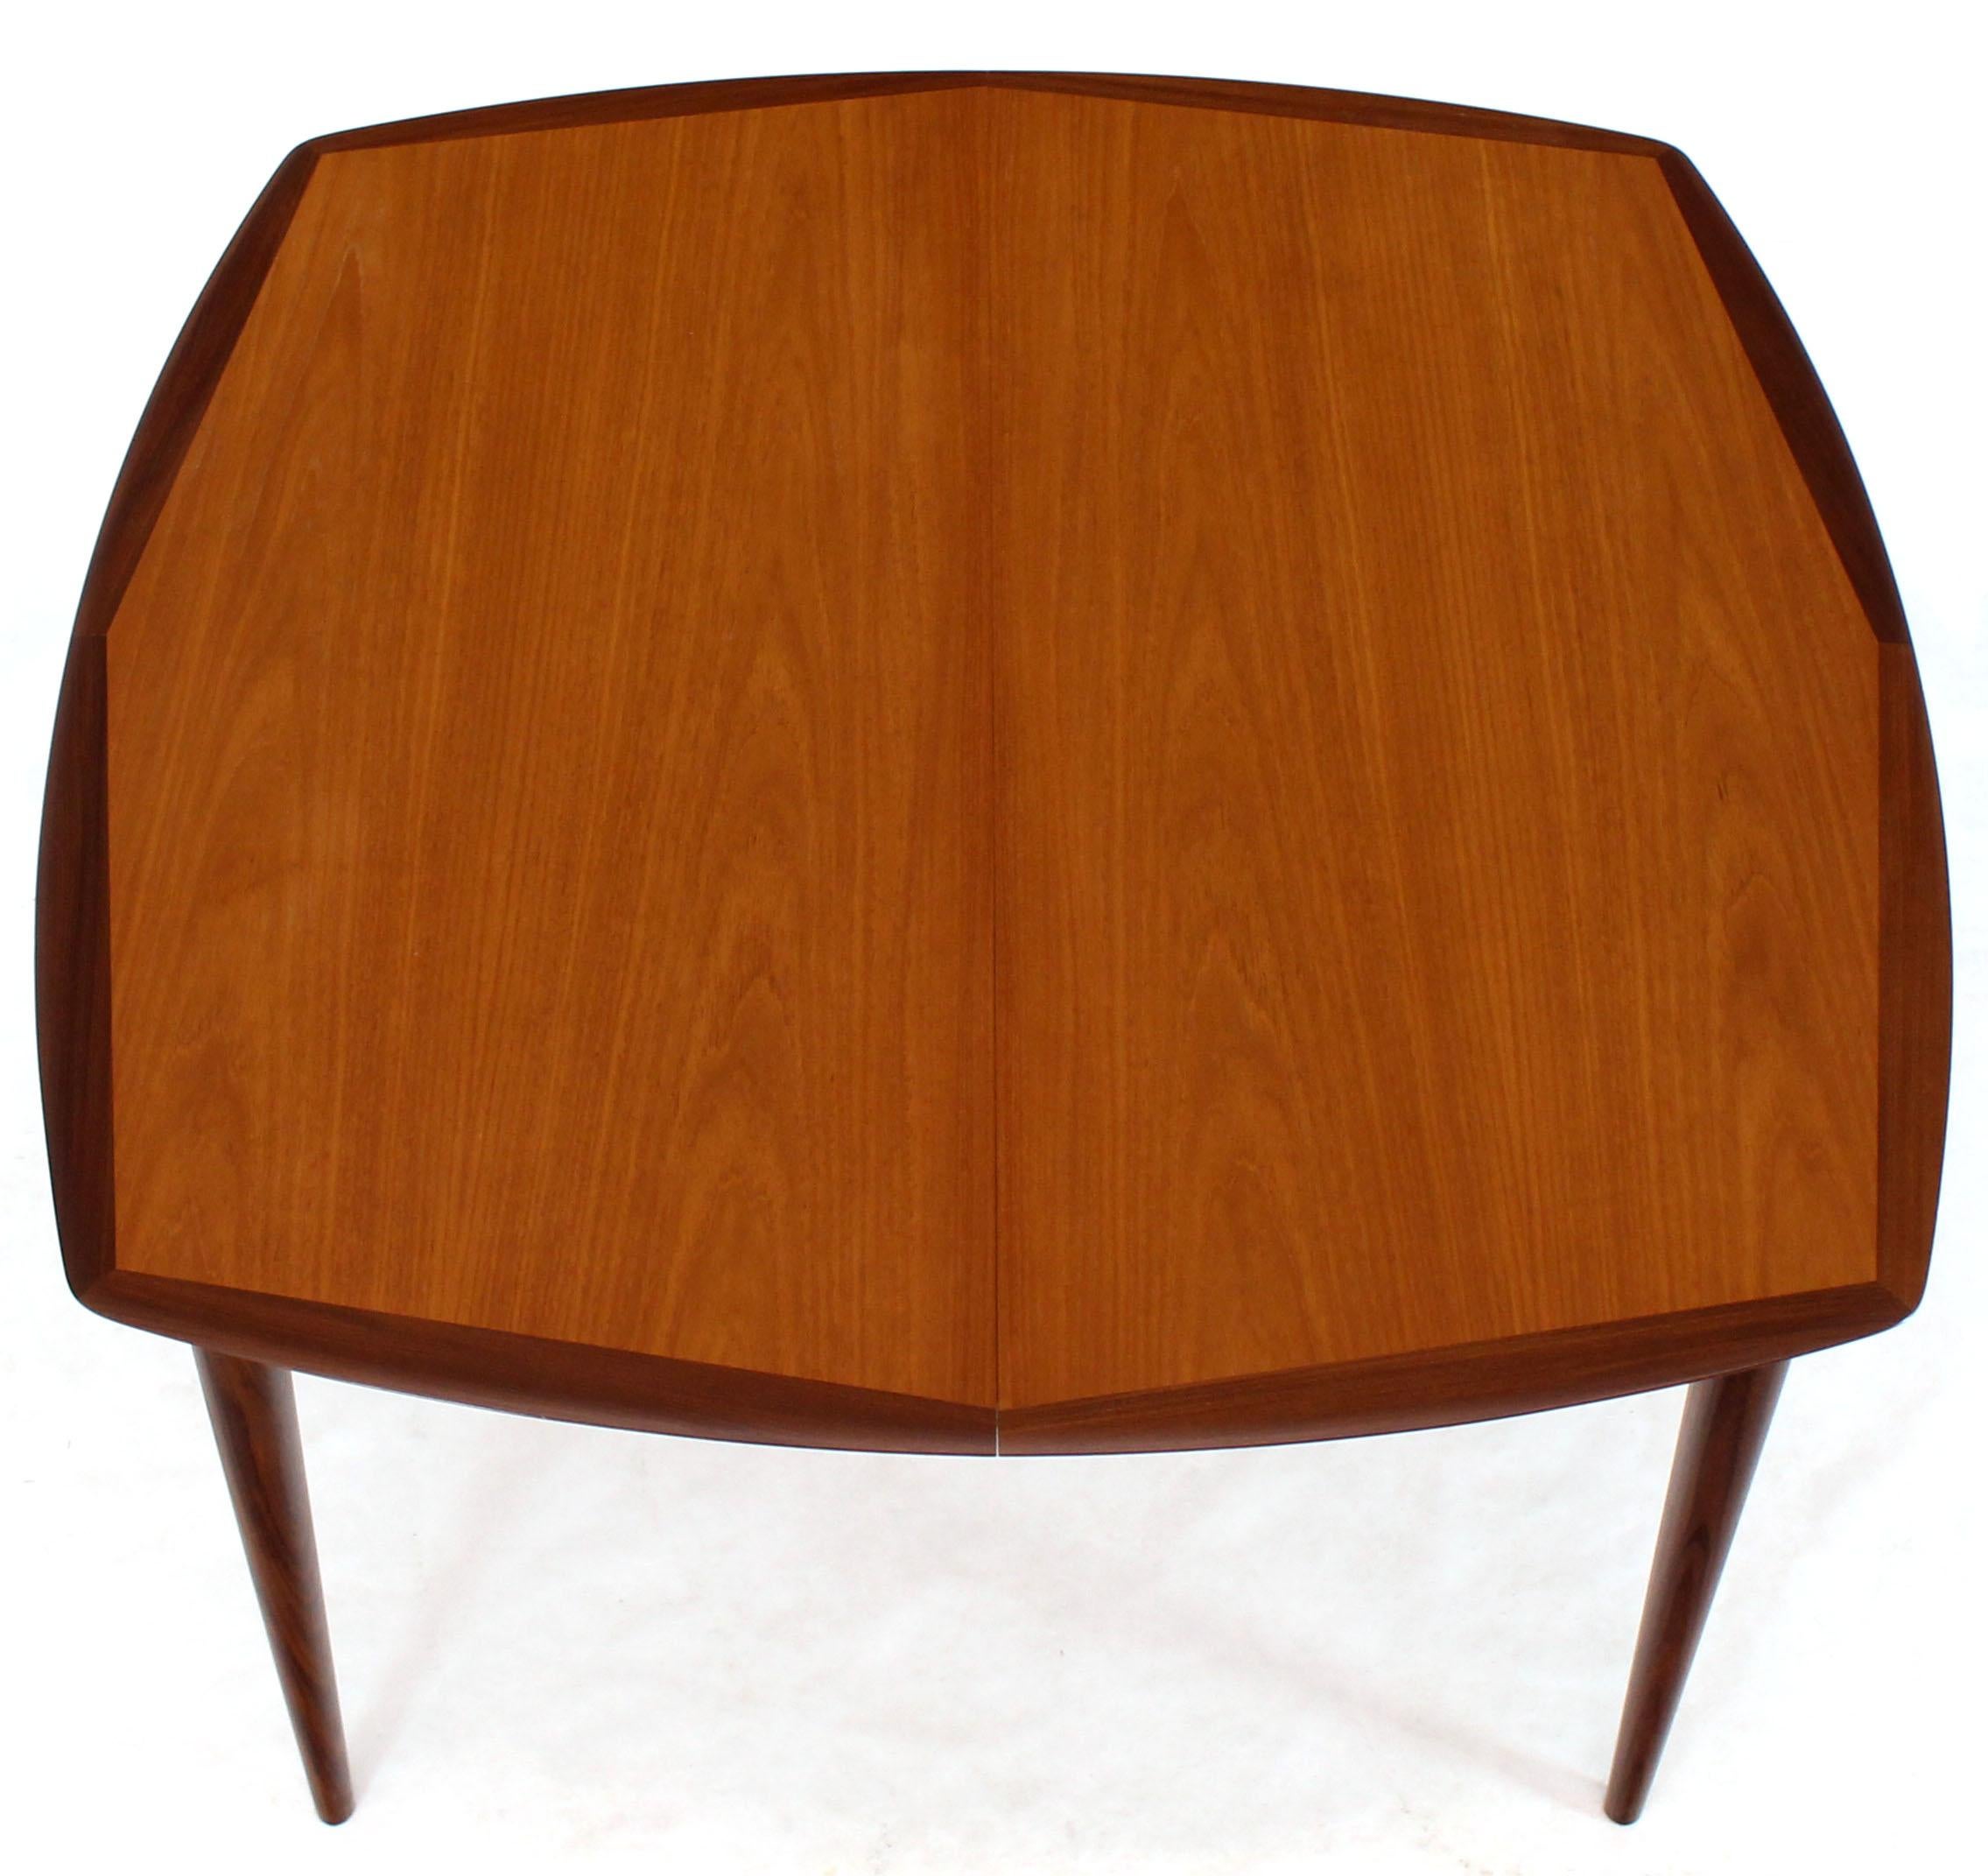 Danish Mid-Century Modern 47 x 47 square dining table with 3 x 16